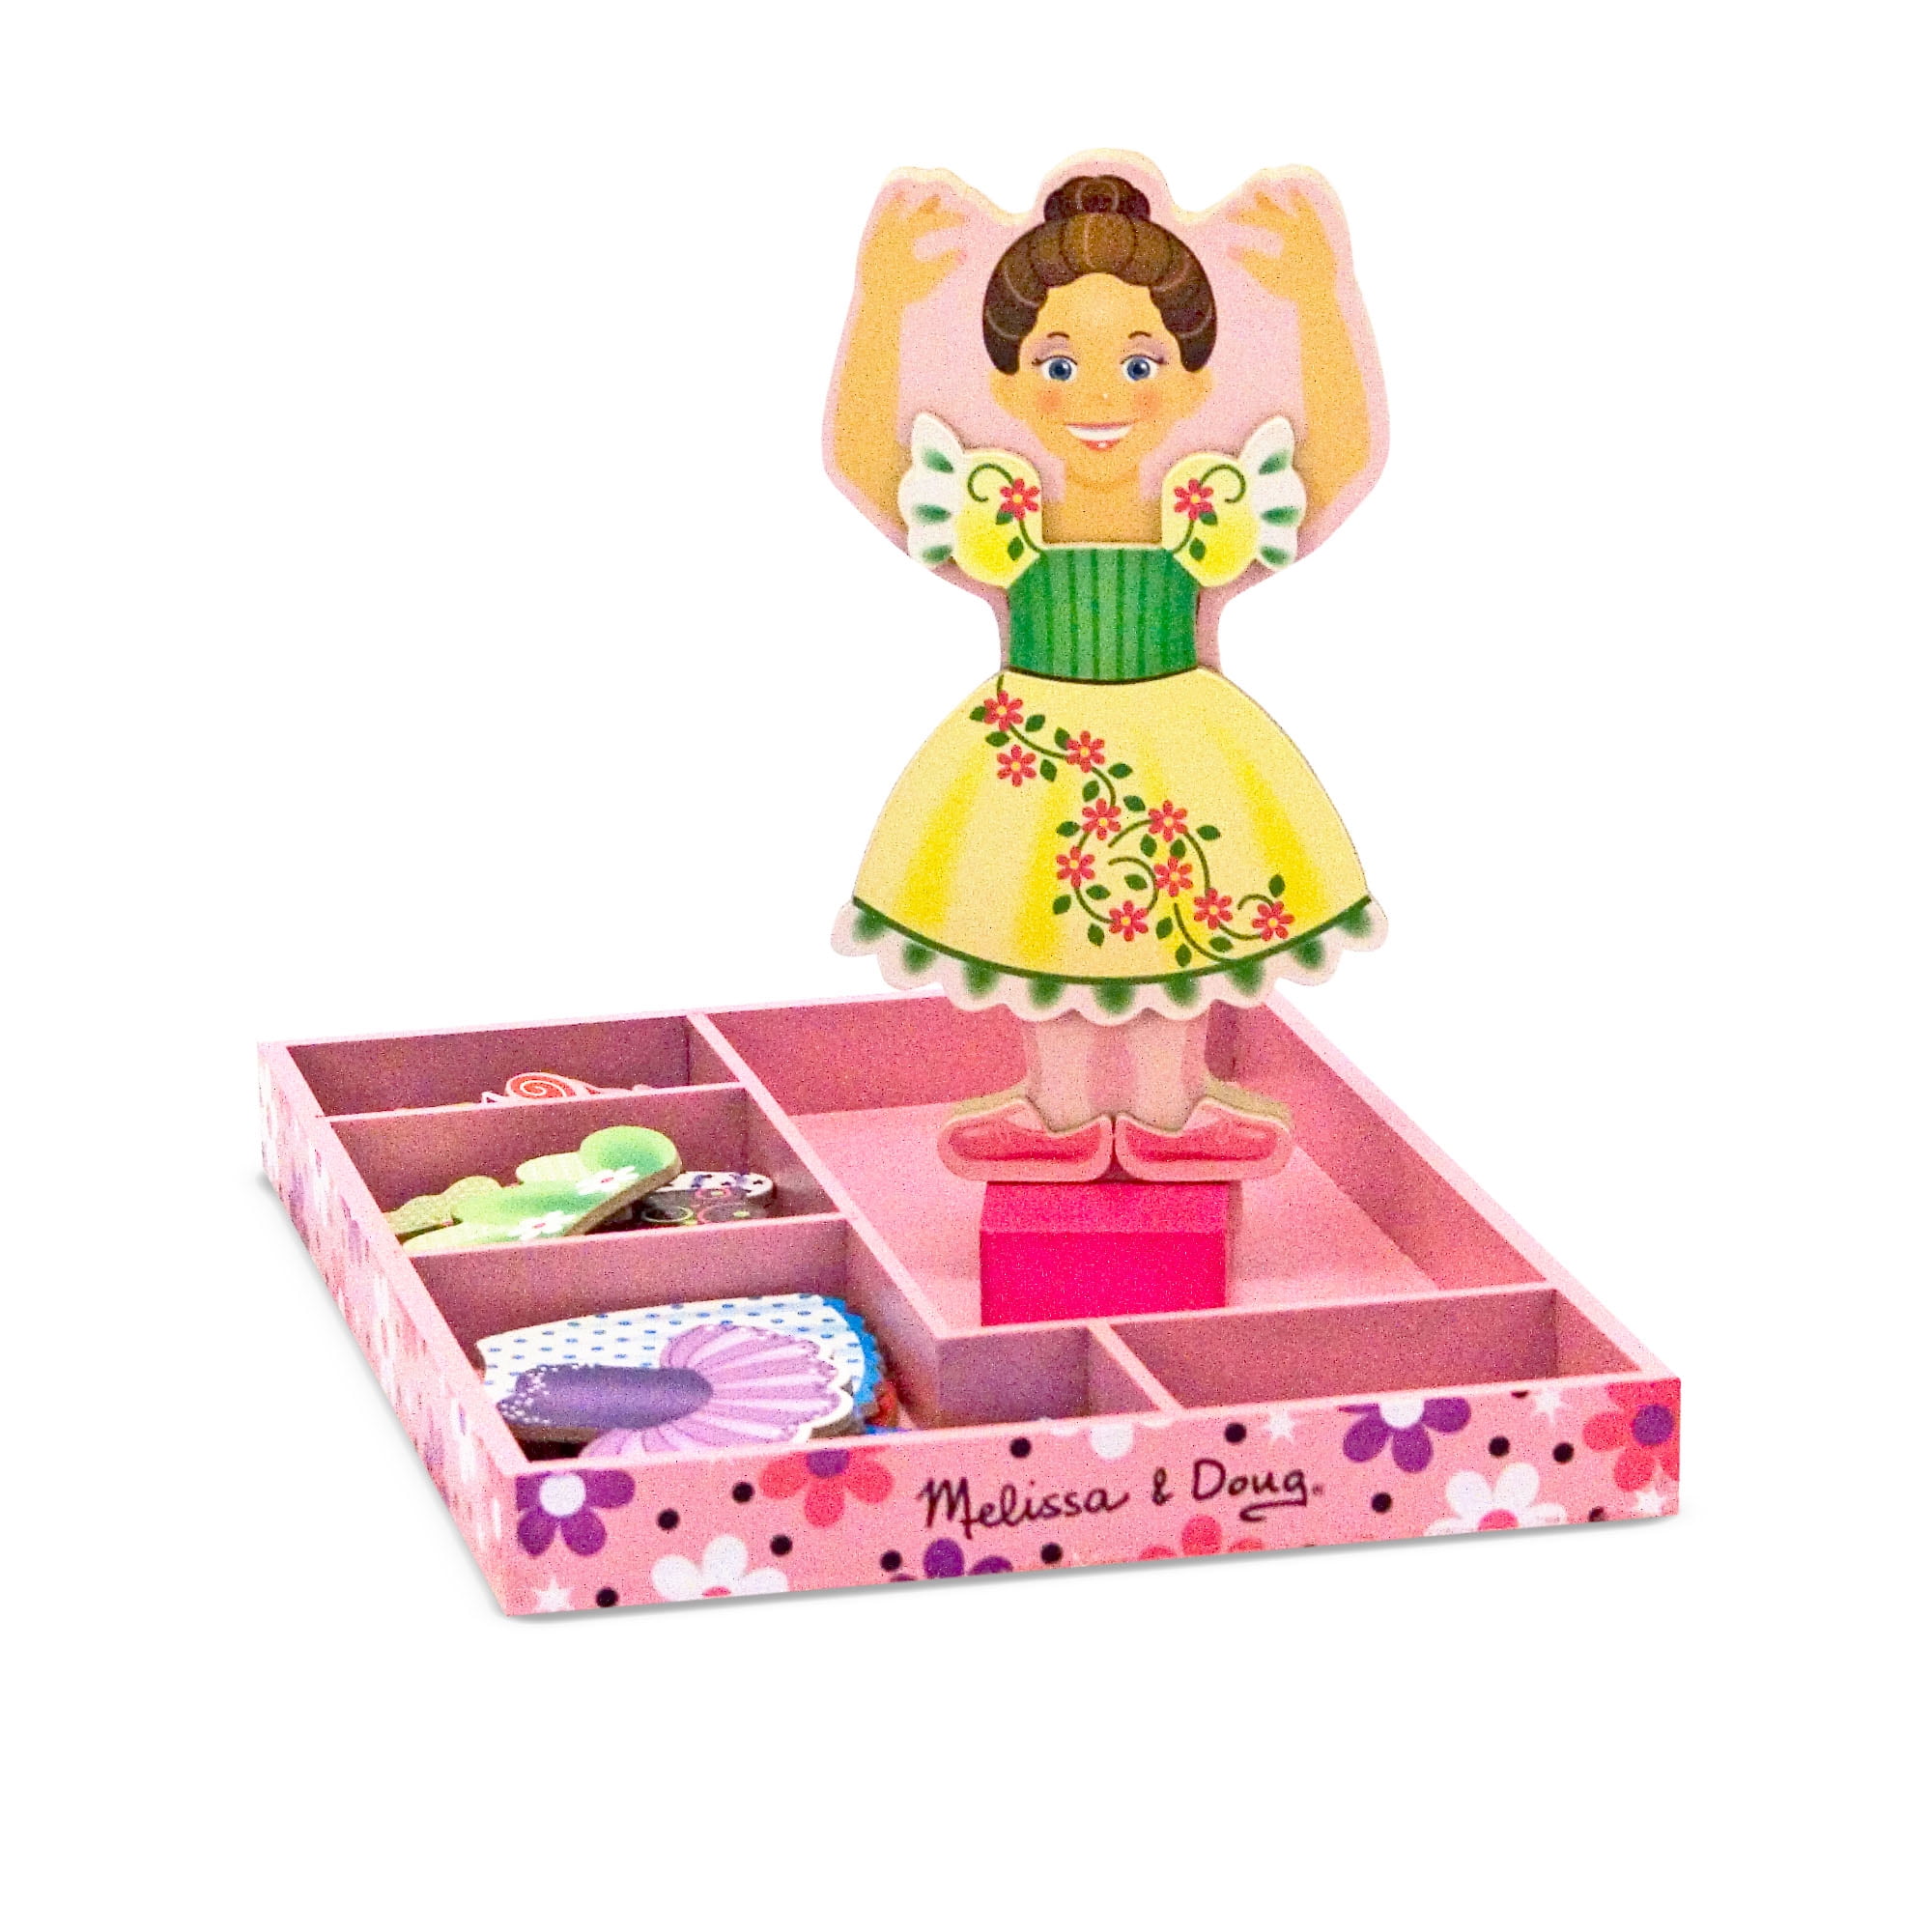 Melissa & Doug Decorate-Your-Own Wooden Magnetic Ballerina Fashions Craft Kit